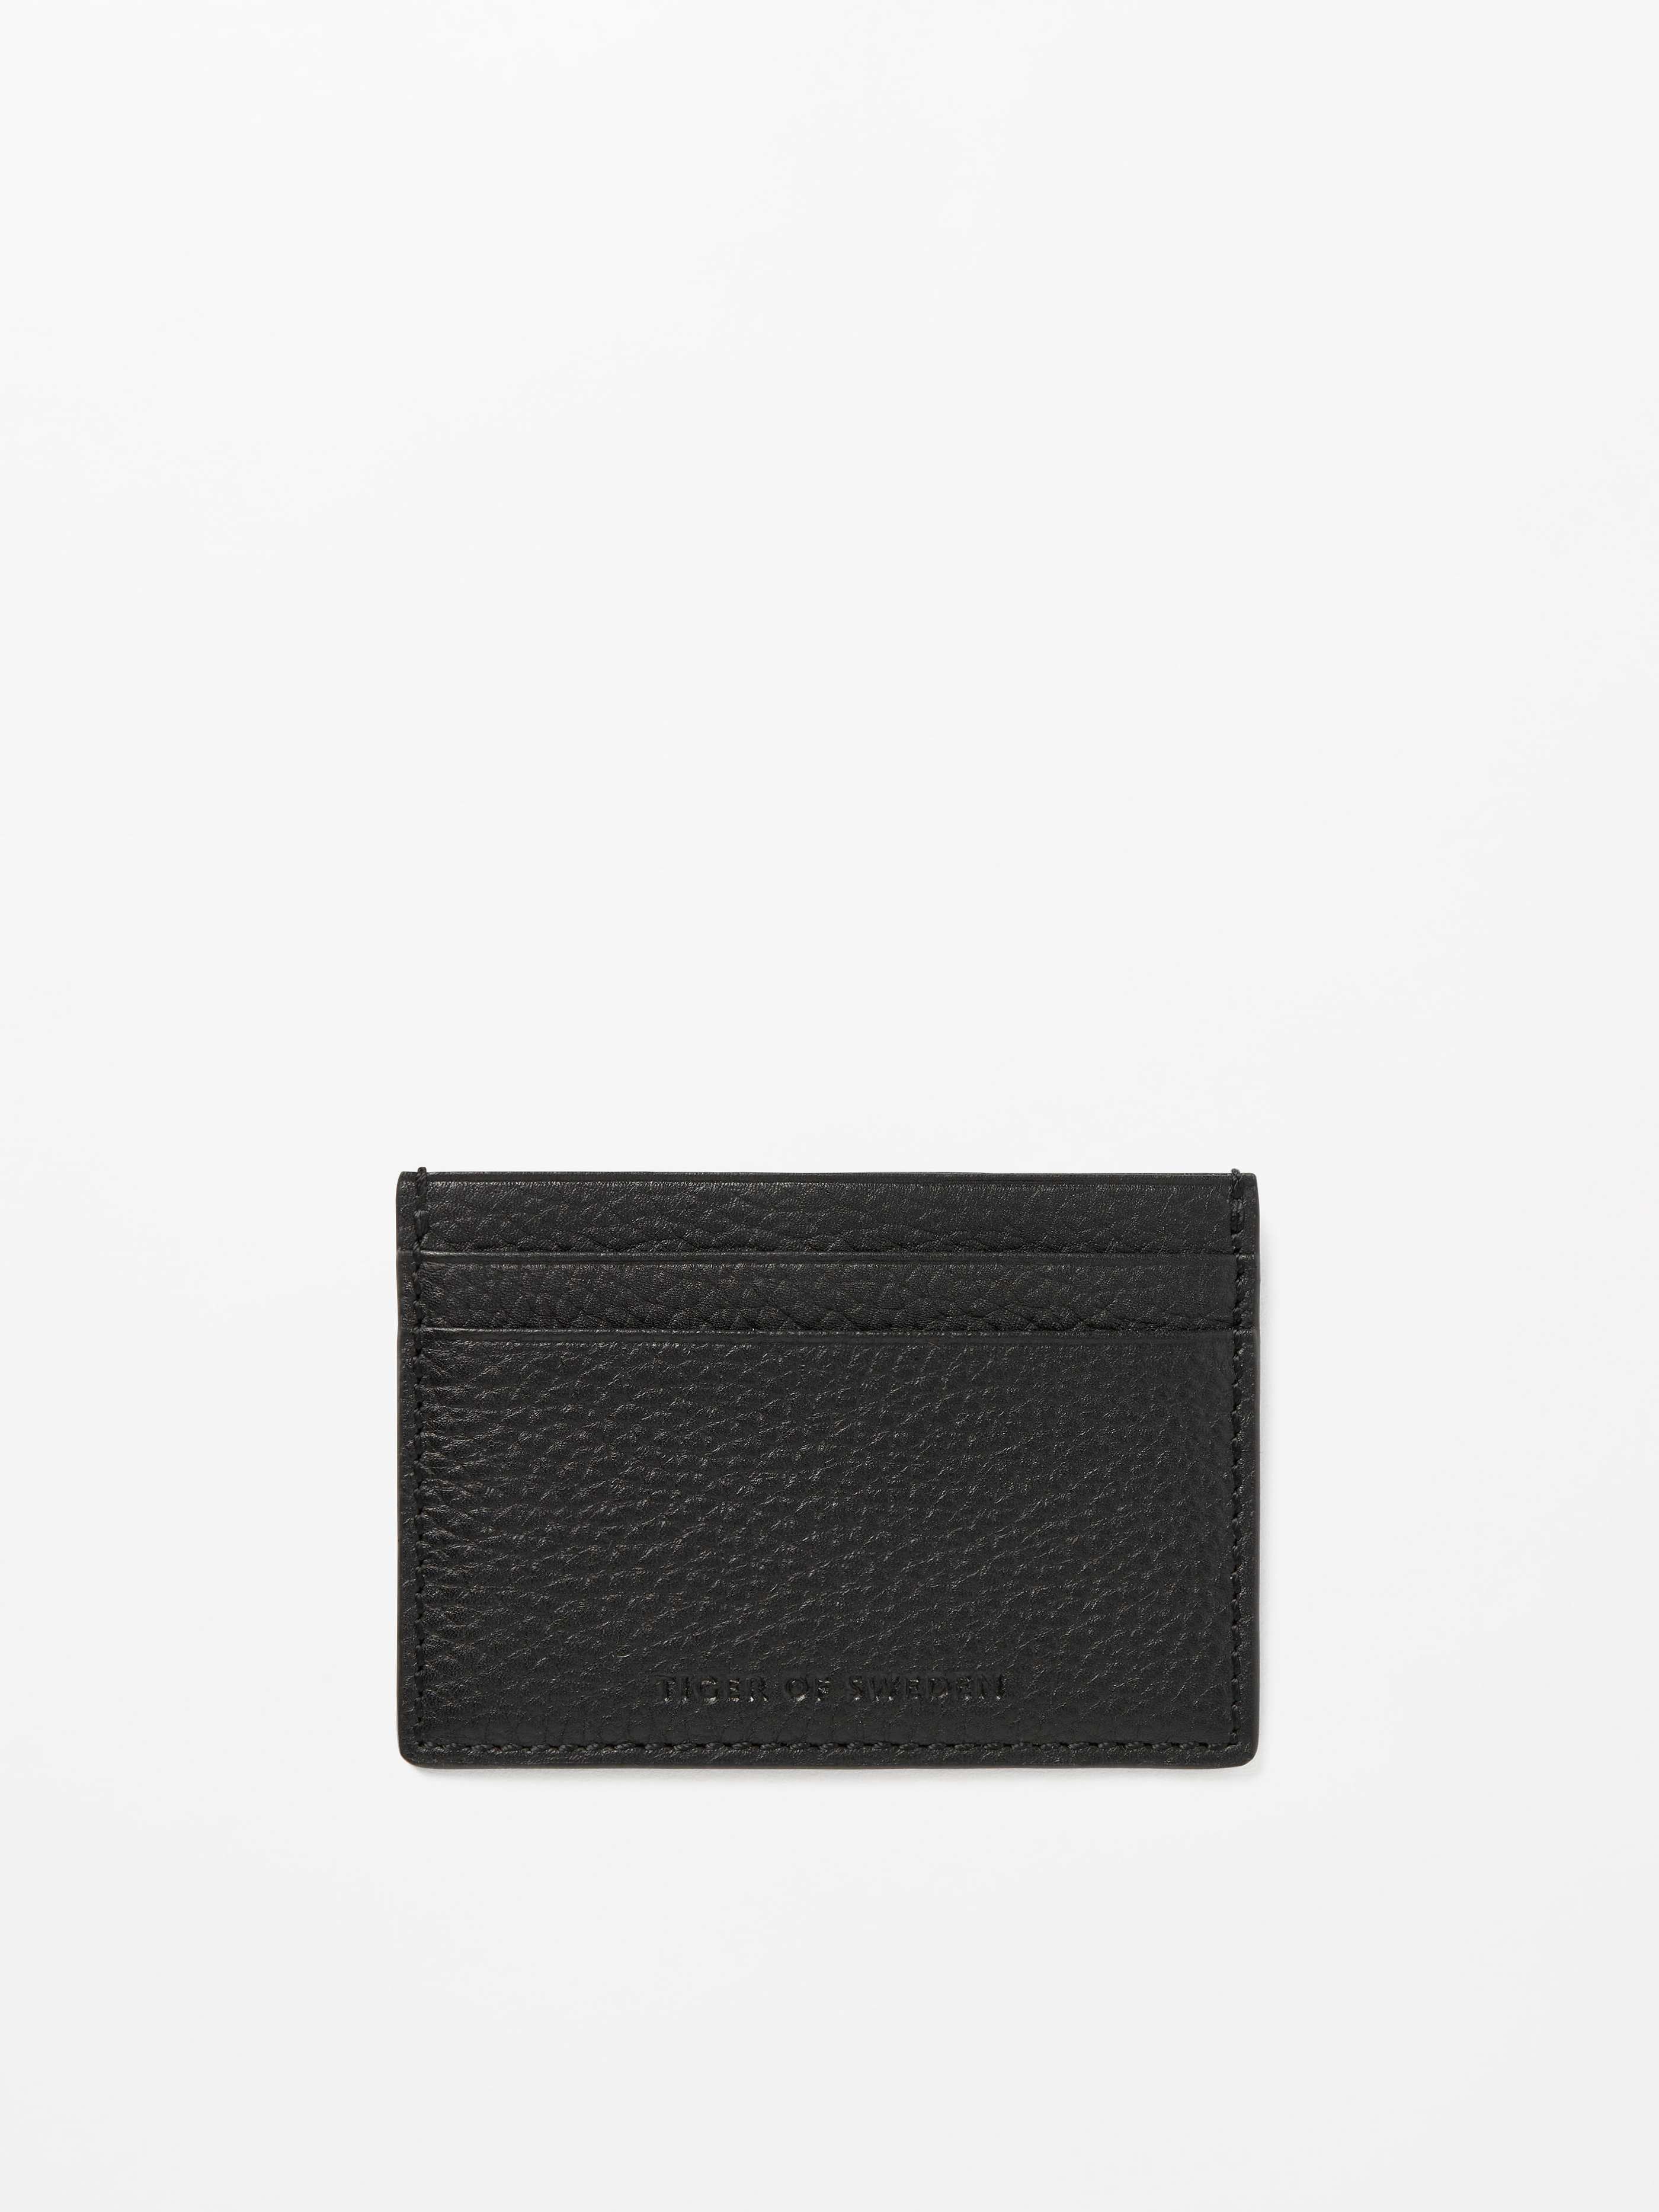 TIGER OF SWEDEN WAKE CARDHOLDER IN BLACK U69380009Z 050 | Shop from eightywingold an official brand partner for TIGER OF SWEDEN CANADA &amp; US